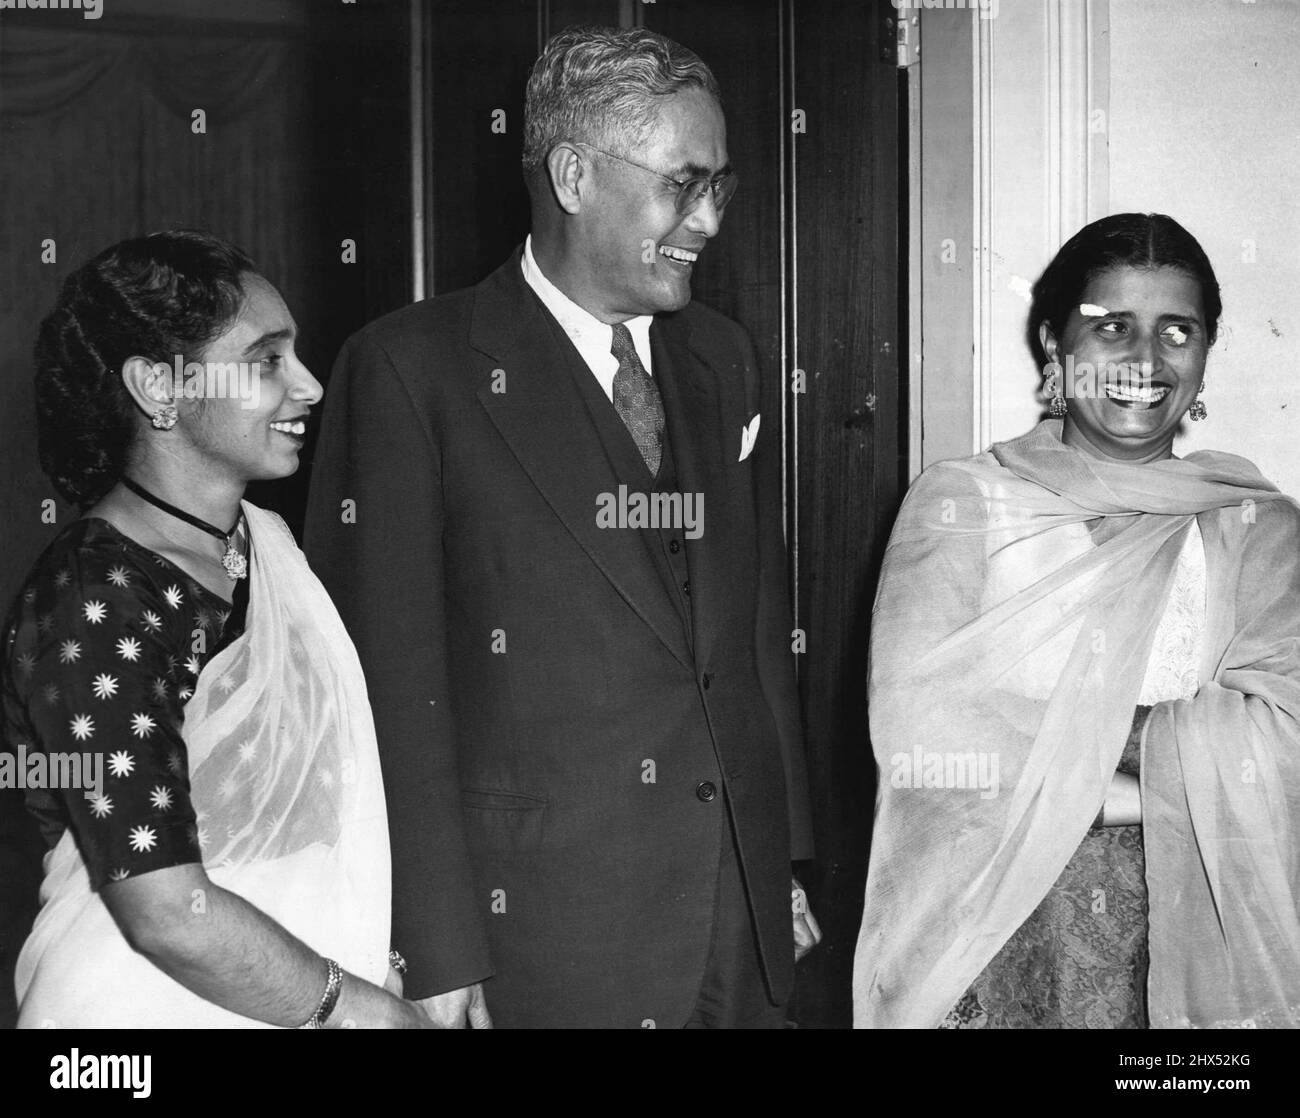 The Begum Rahman wife of the High Commissioner for Pakistan with Minister for Philippines Dr. Robert Regala & Mrs. A. Alvie. September 04, 1955. Stock Photo